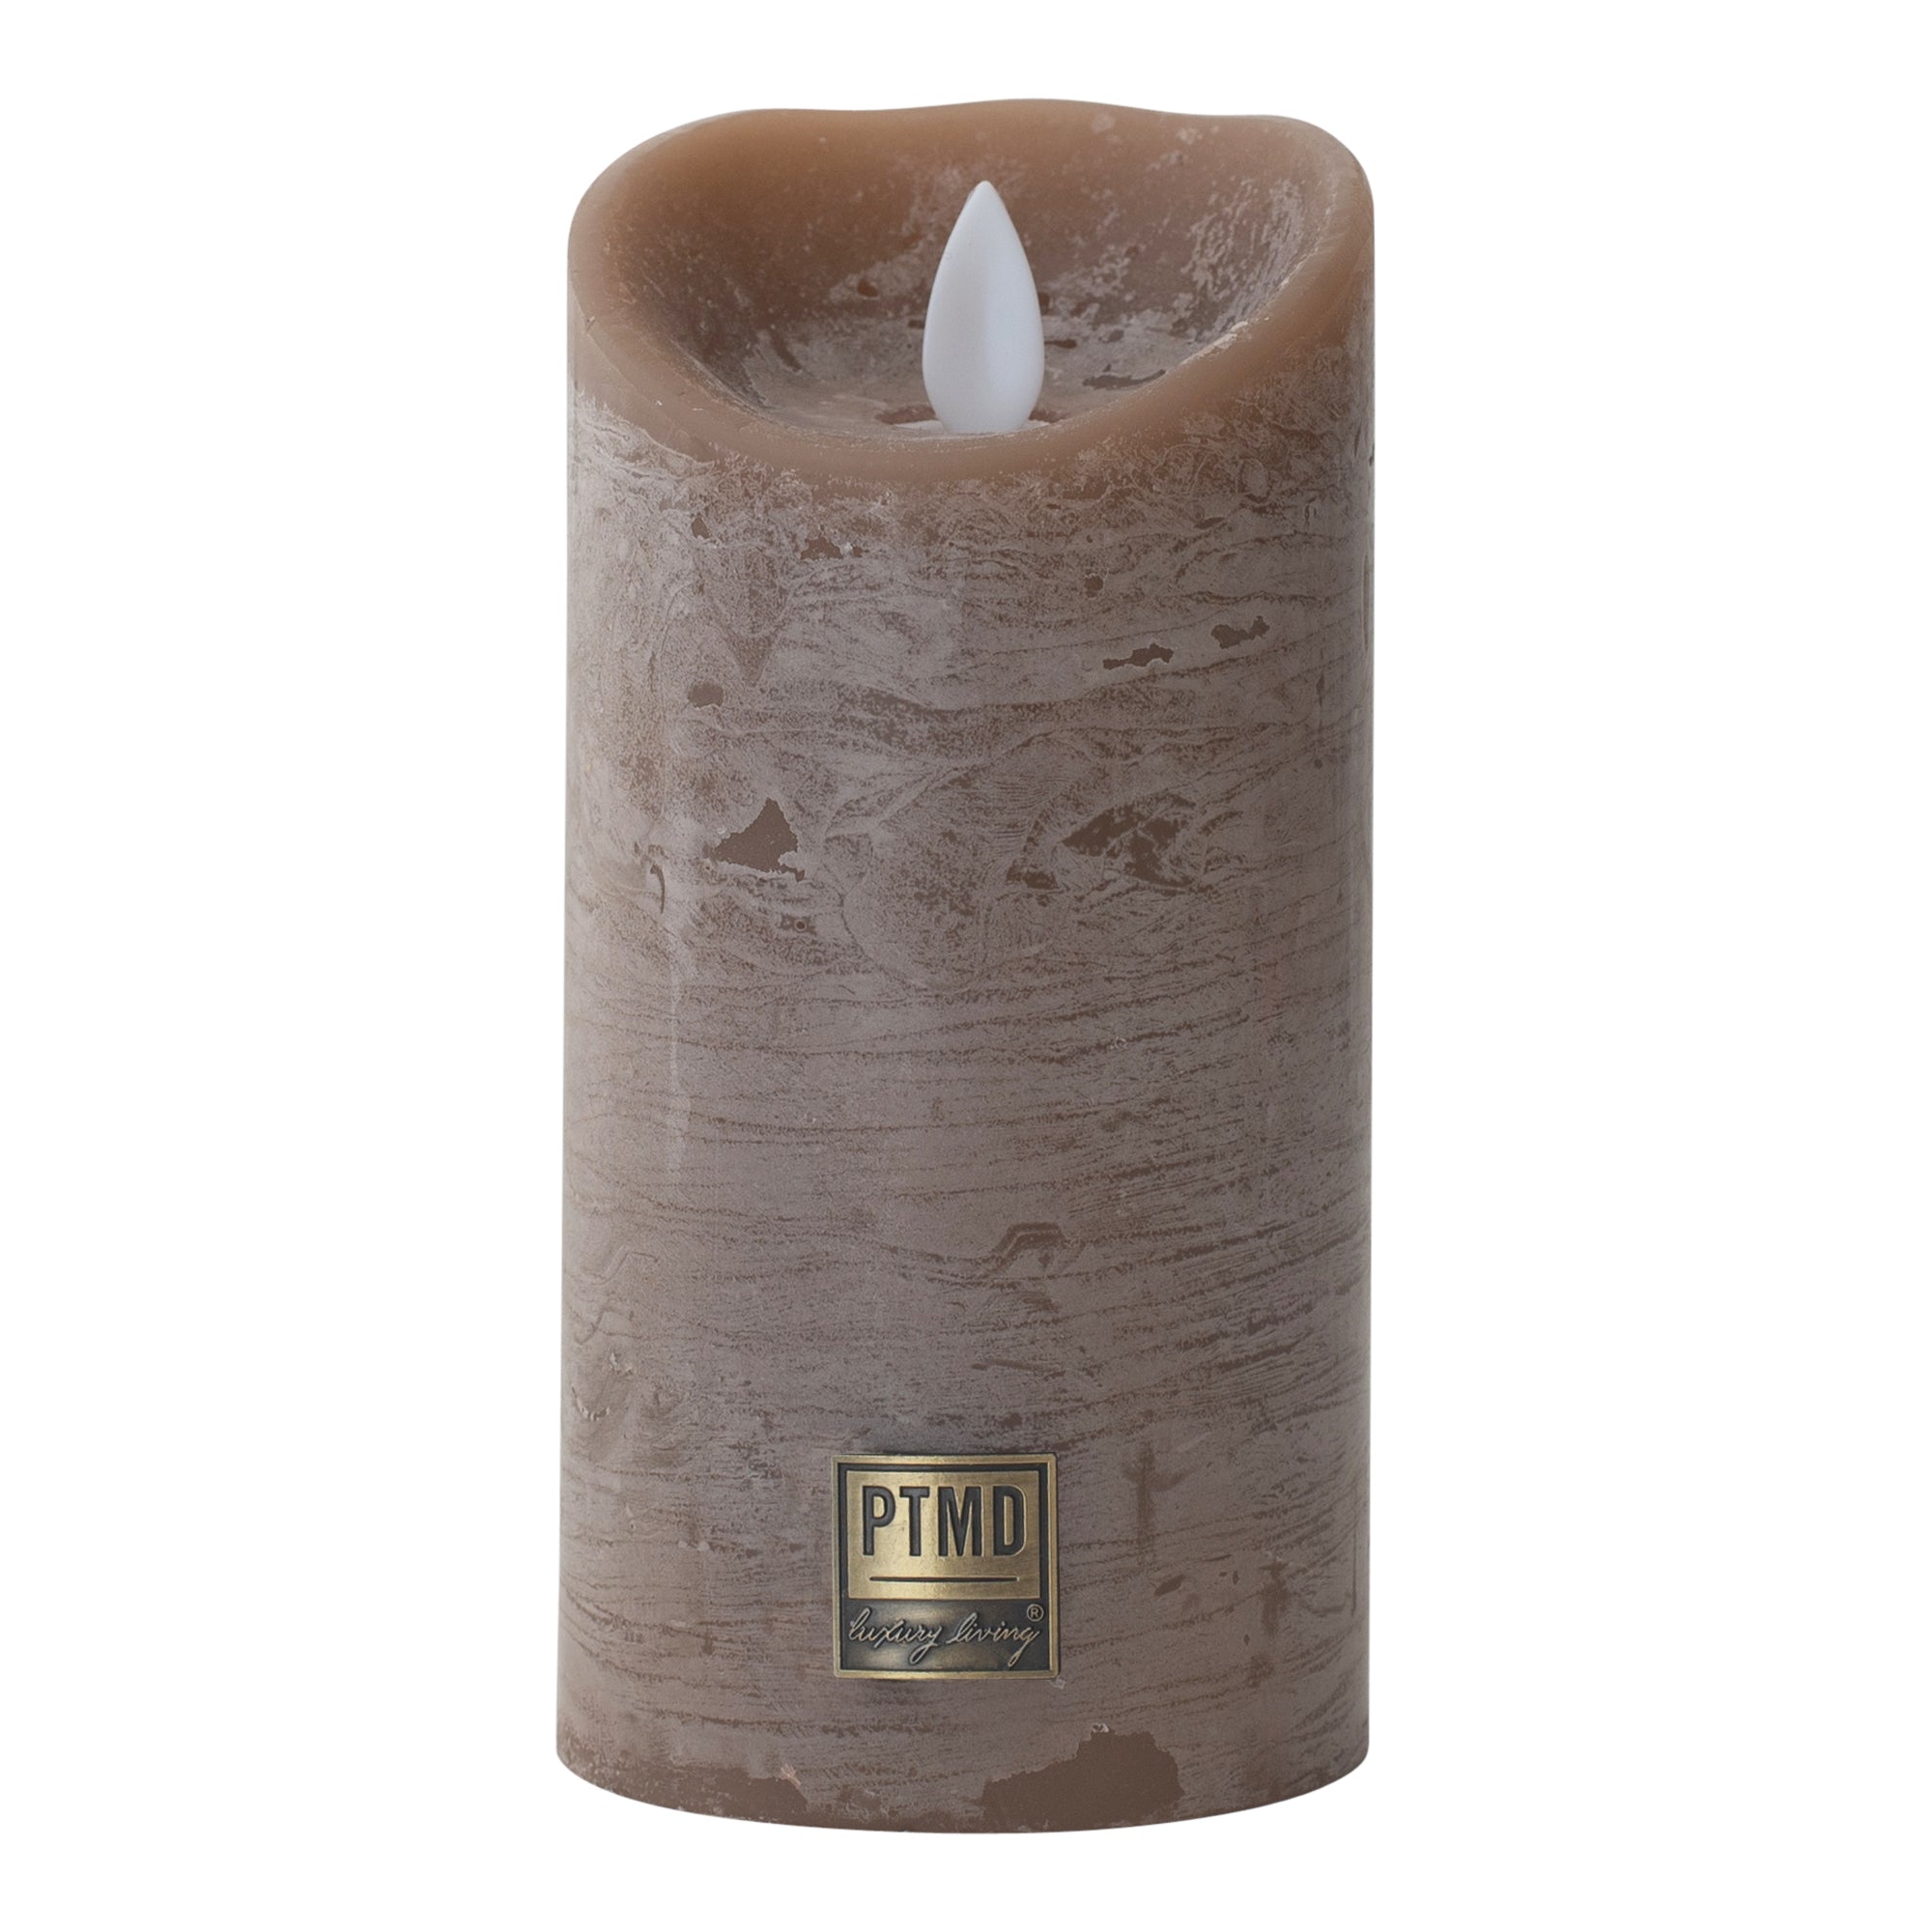 PTMD LED real wax candle with moving flame in brown from Esszett.eu